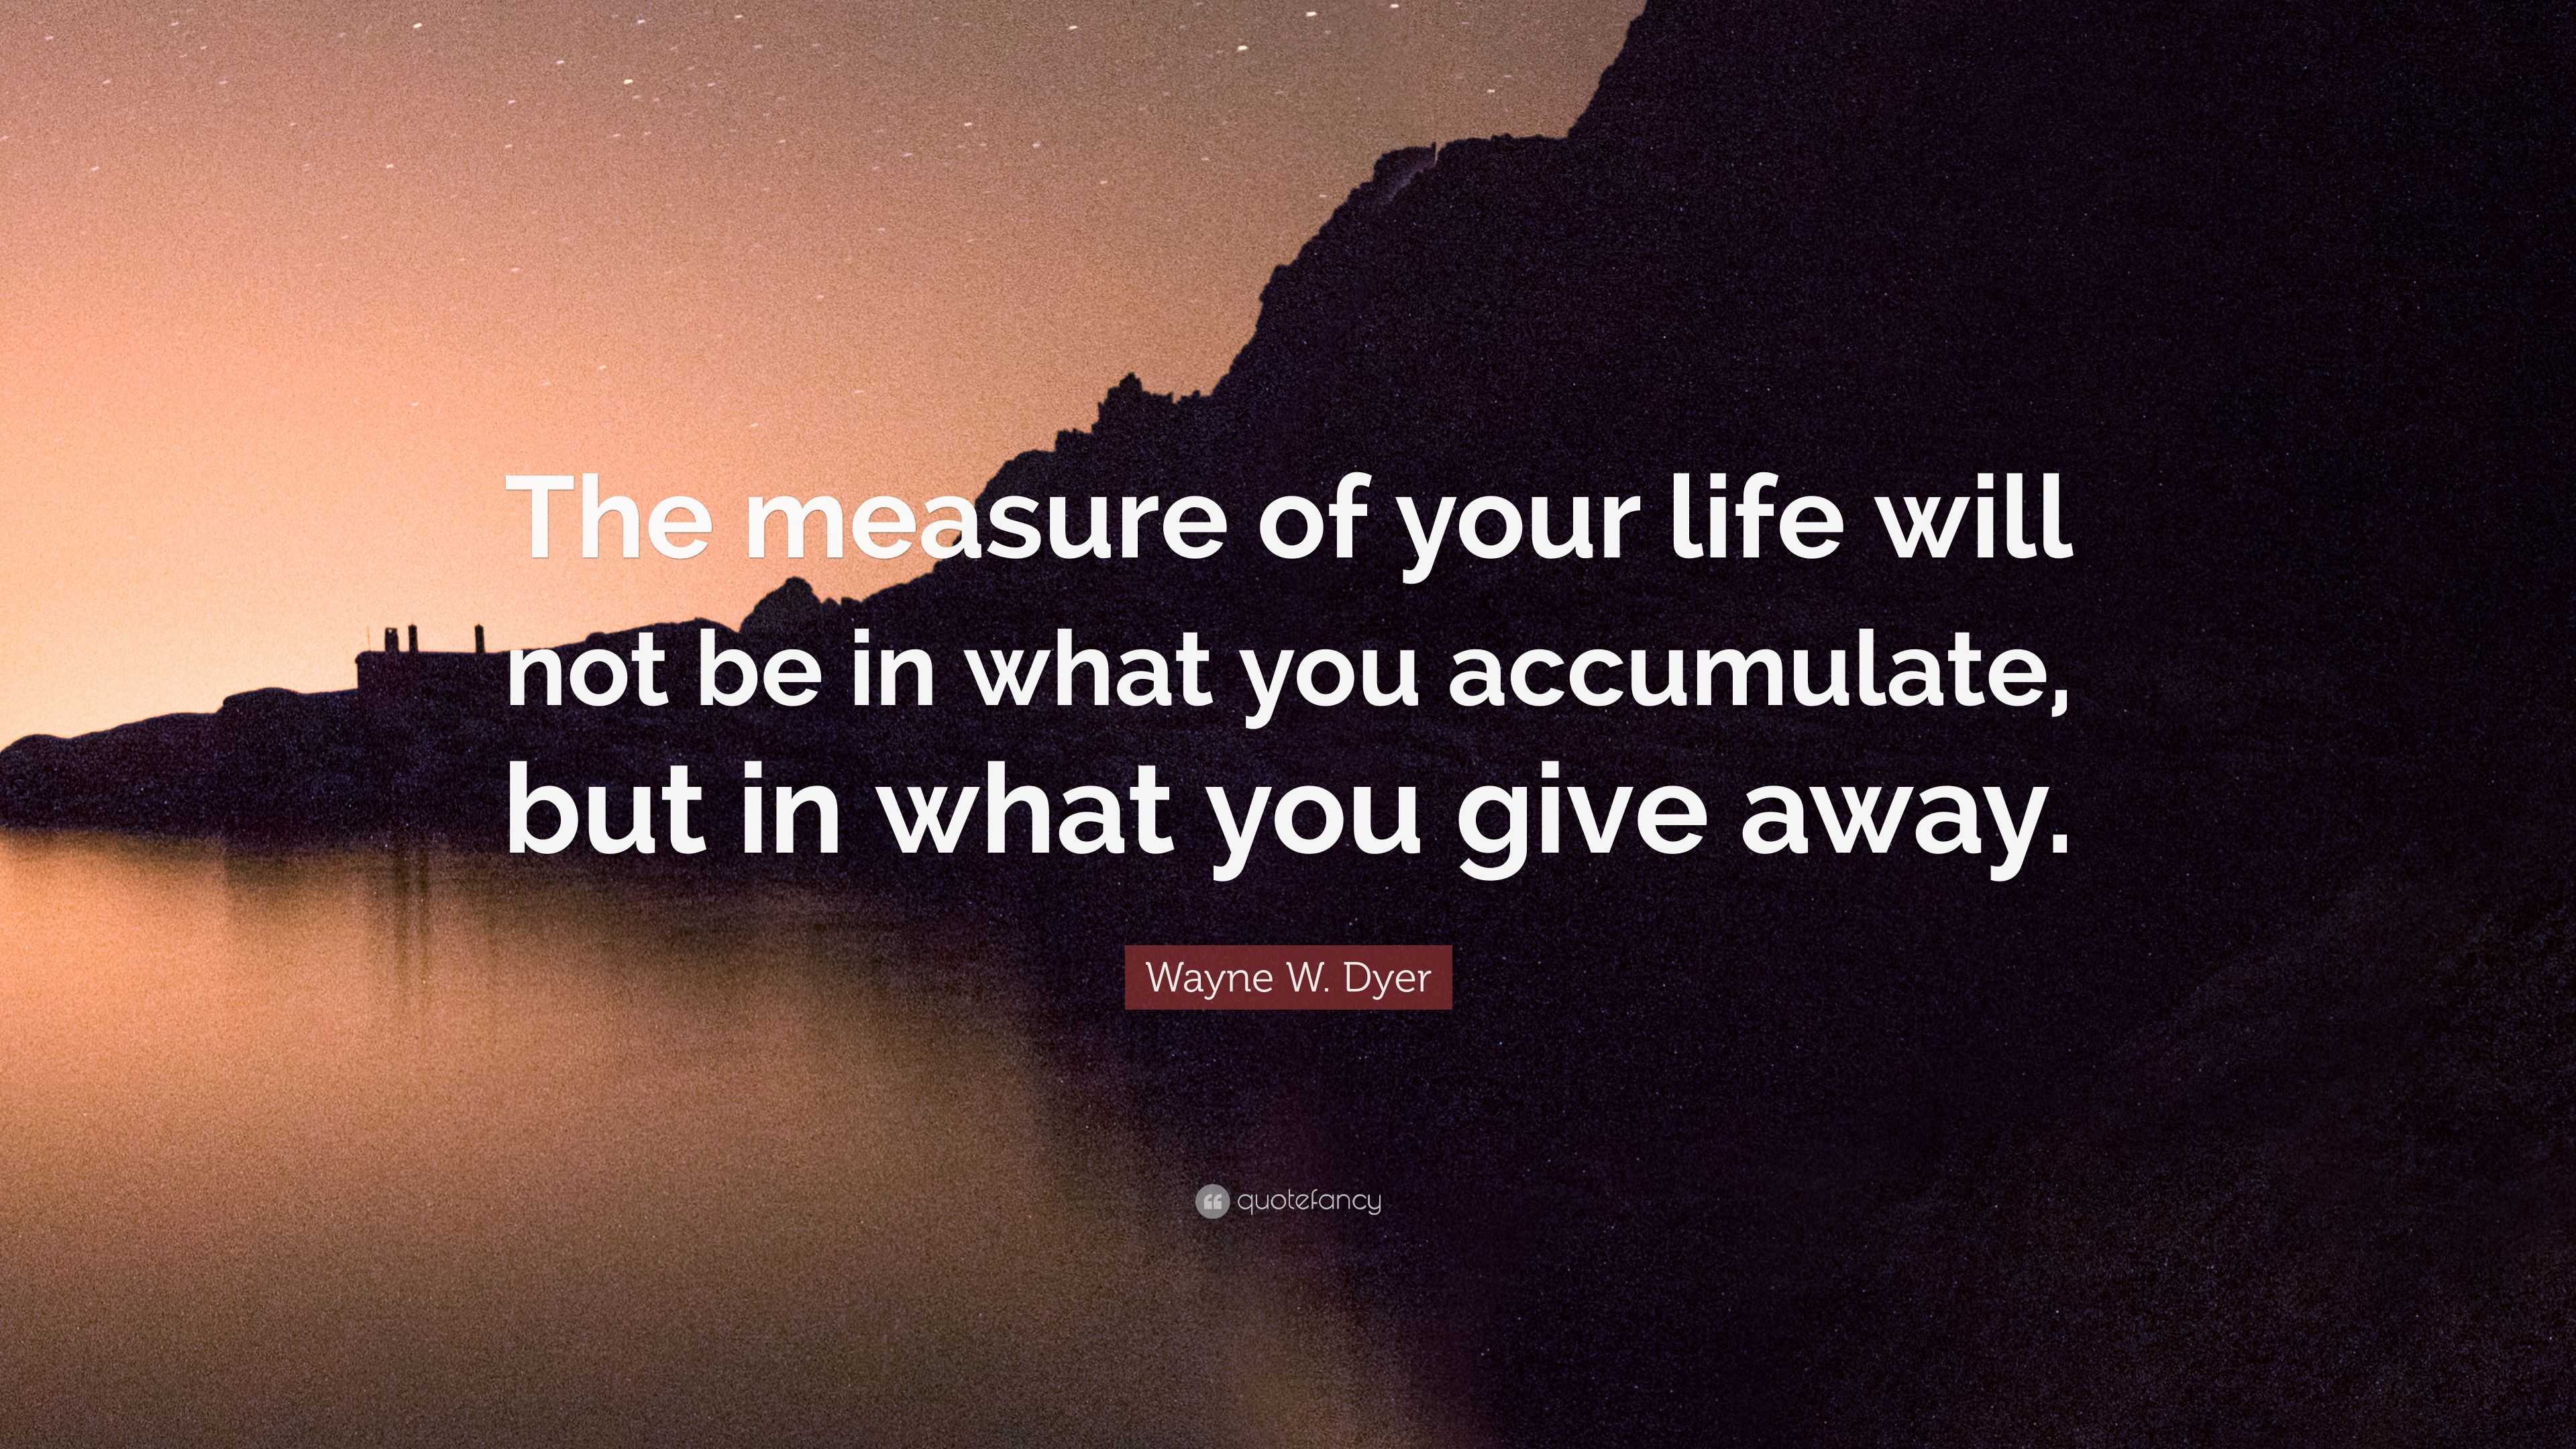 Wayne W Dyer Quote “The measure of your life will not be in